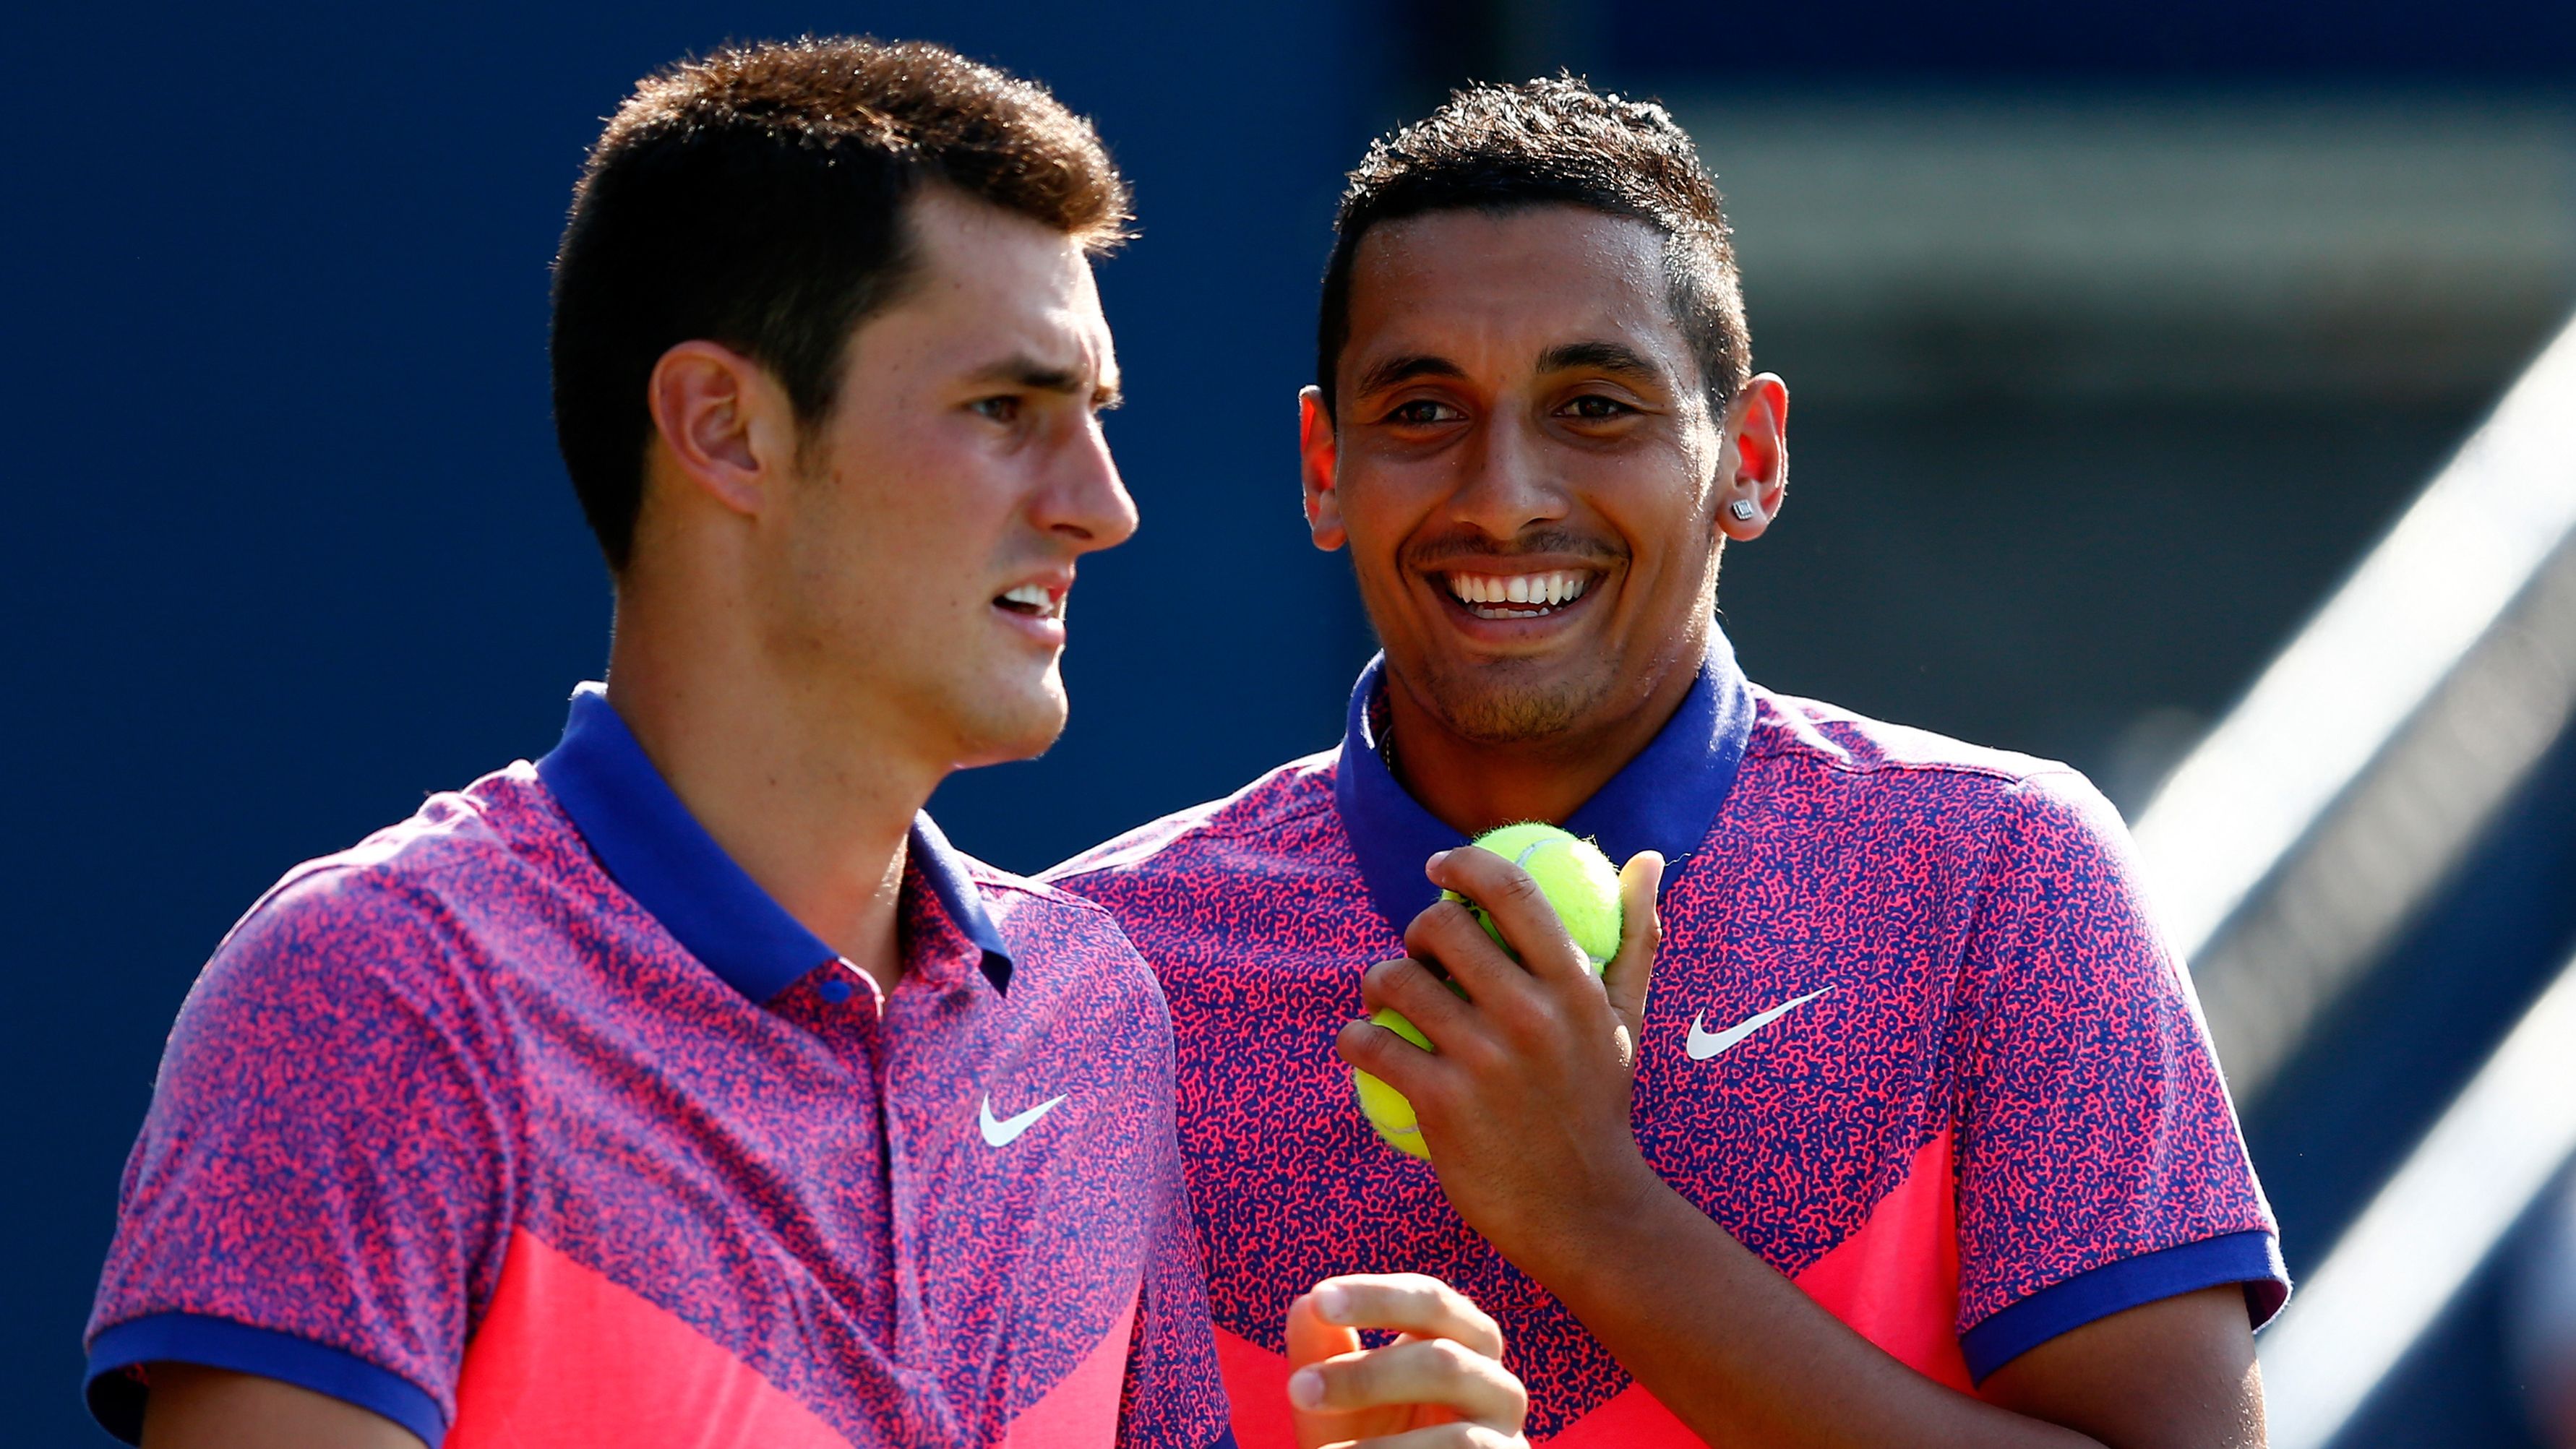 Bernard Tomic renews call for Nick Kyrgios to step in the ring to resolve 'childish' feud